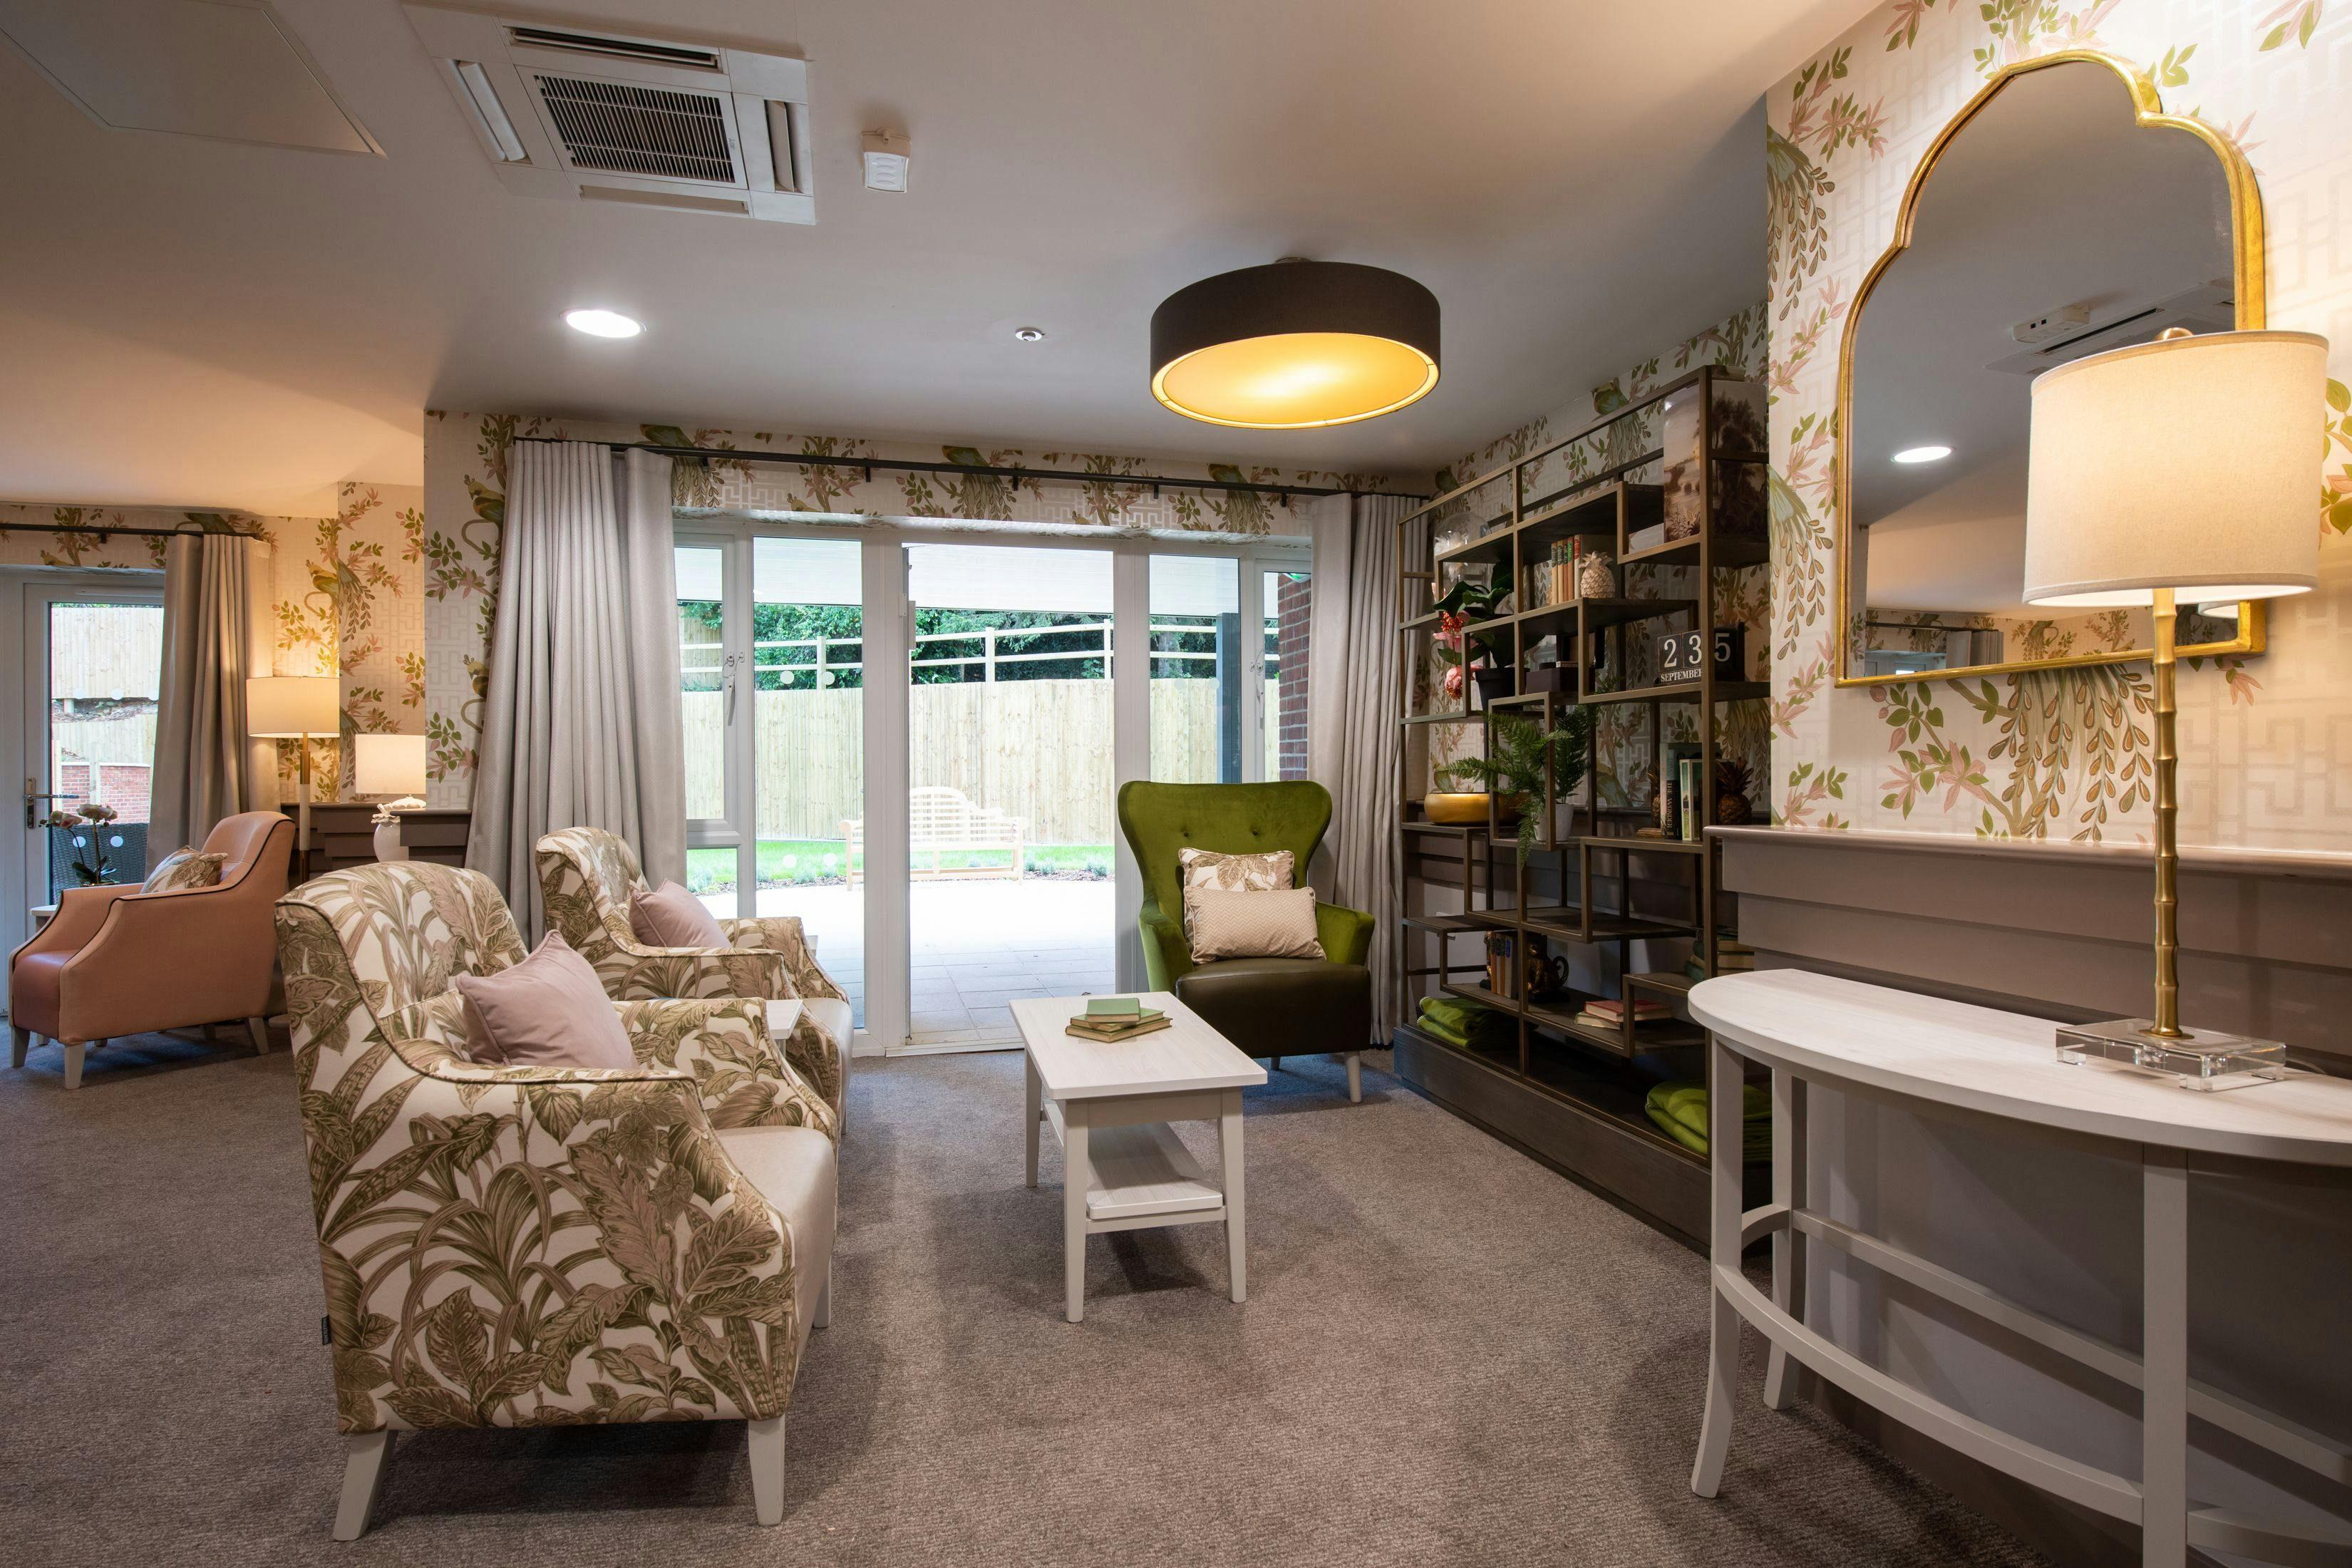 New Care - Wilmslow Manor care home 16